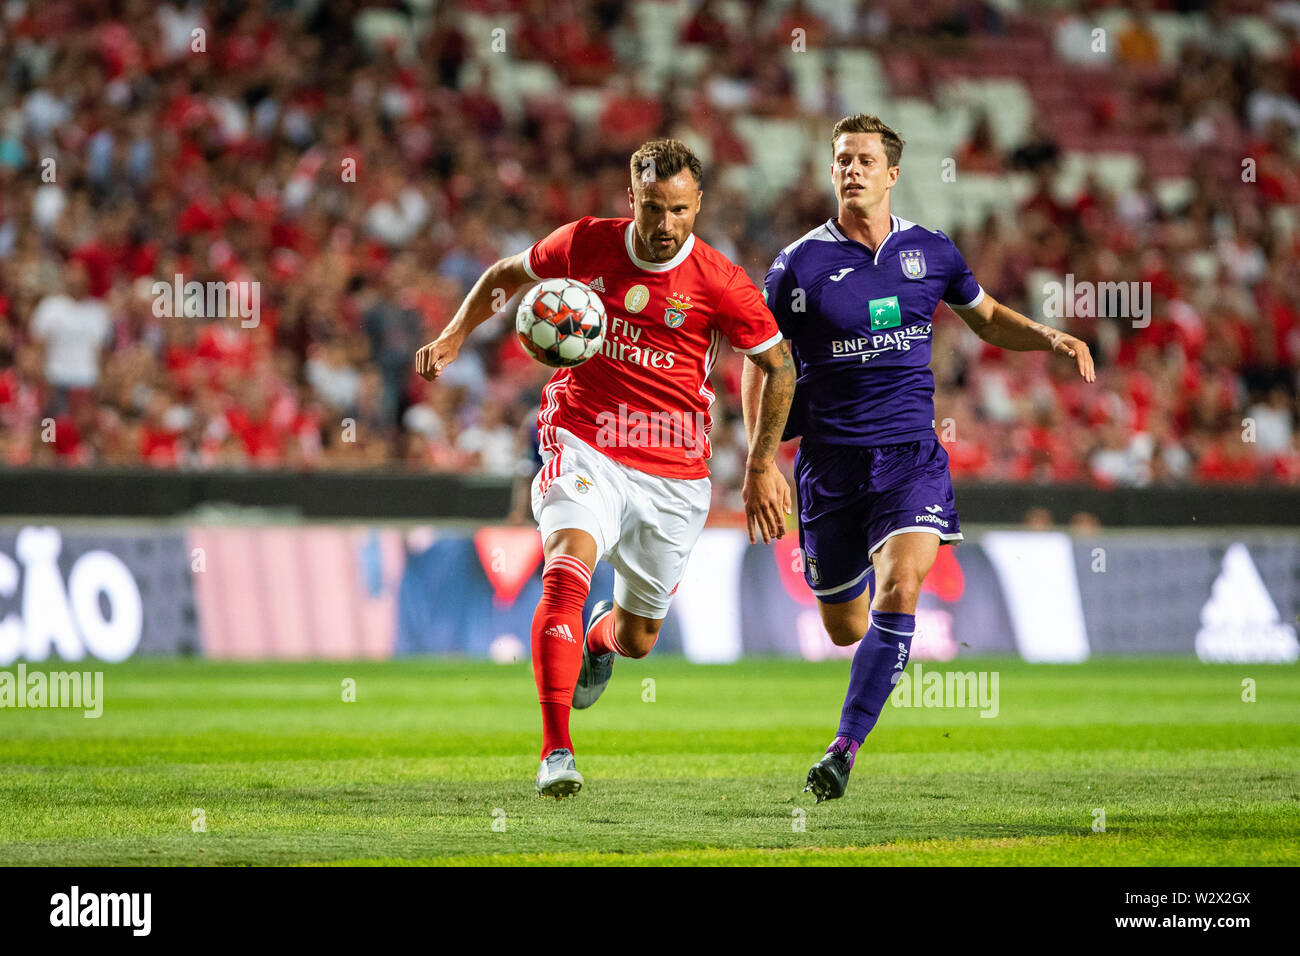 Lisbon, Portugal. 10th July, 2019. Haris Seferovic of SL Benfica vies for the ball with Jamie Lawrence of RSC Anderlecht during the Pre-Season football match 2019/2020 between SL Benfica vs Royal Sporting Club Anderlecht. (Final score: SL Benfica 1 - 2 Royal Sporting Club Anderlecht) Credit: SOPA Images Limited/Alamy Live News Stock Photo